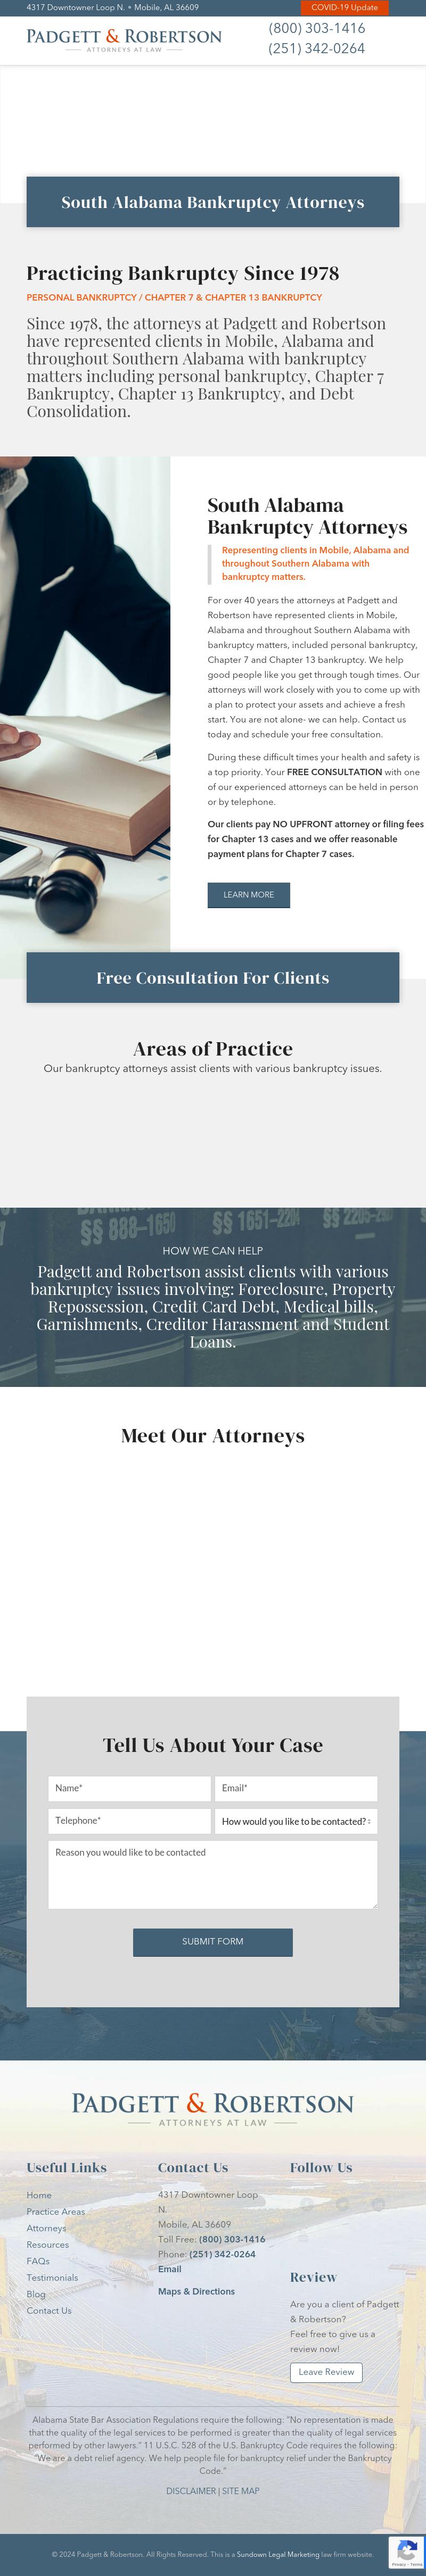 Padgett and Robertson Attorneys - Mobile AL Lawyers